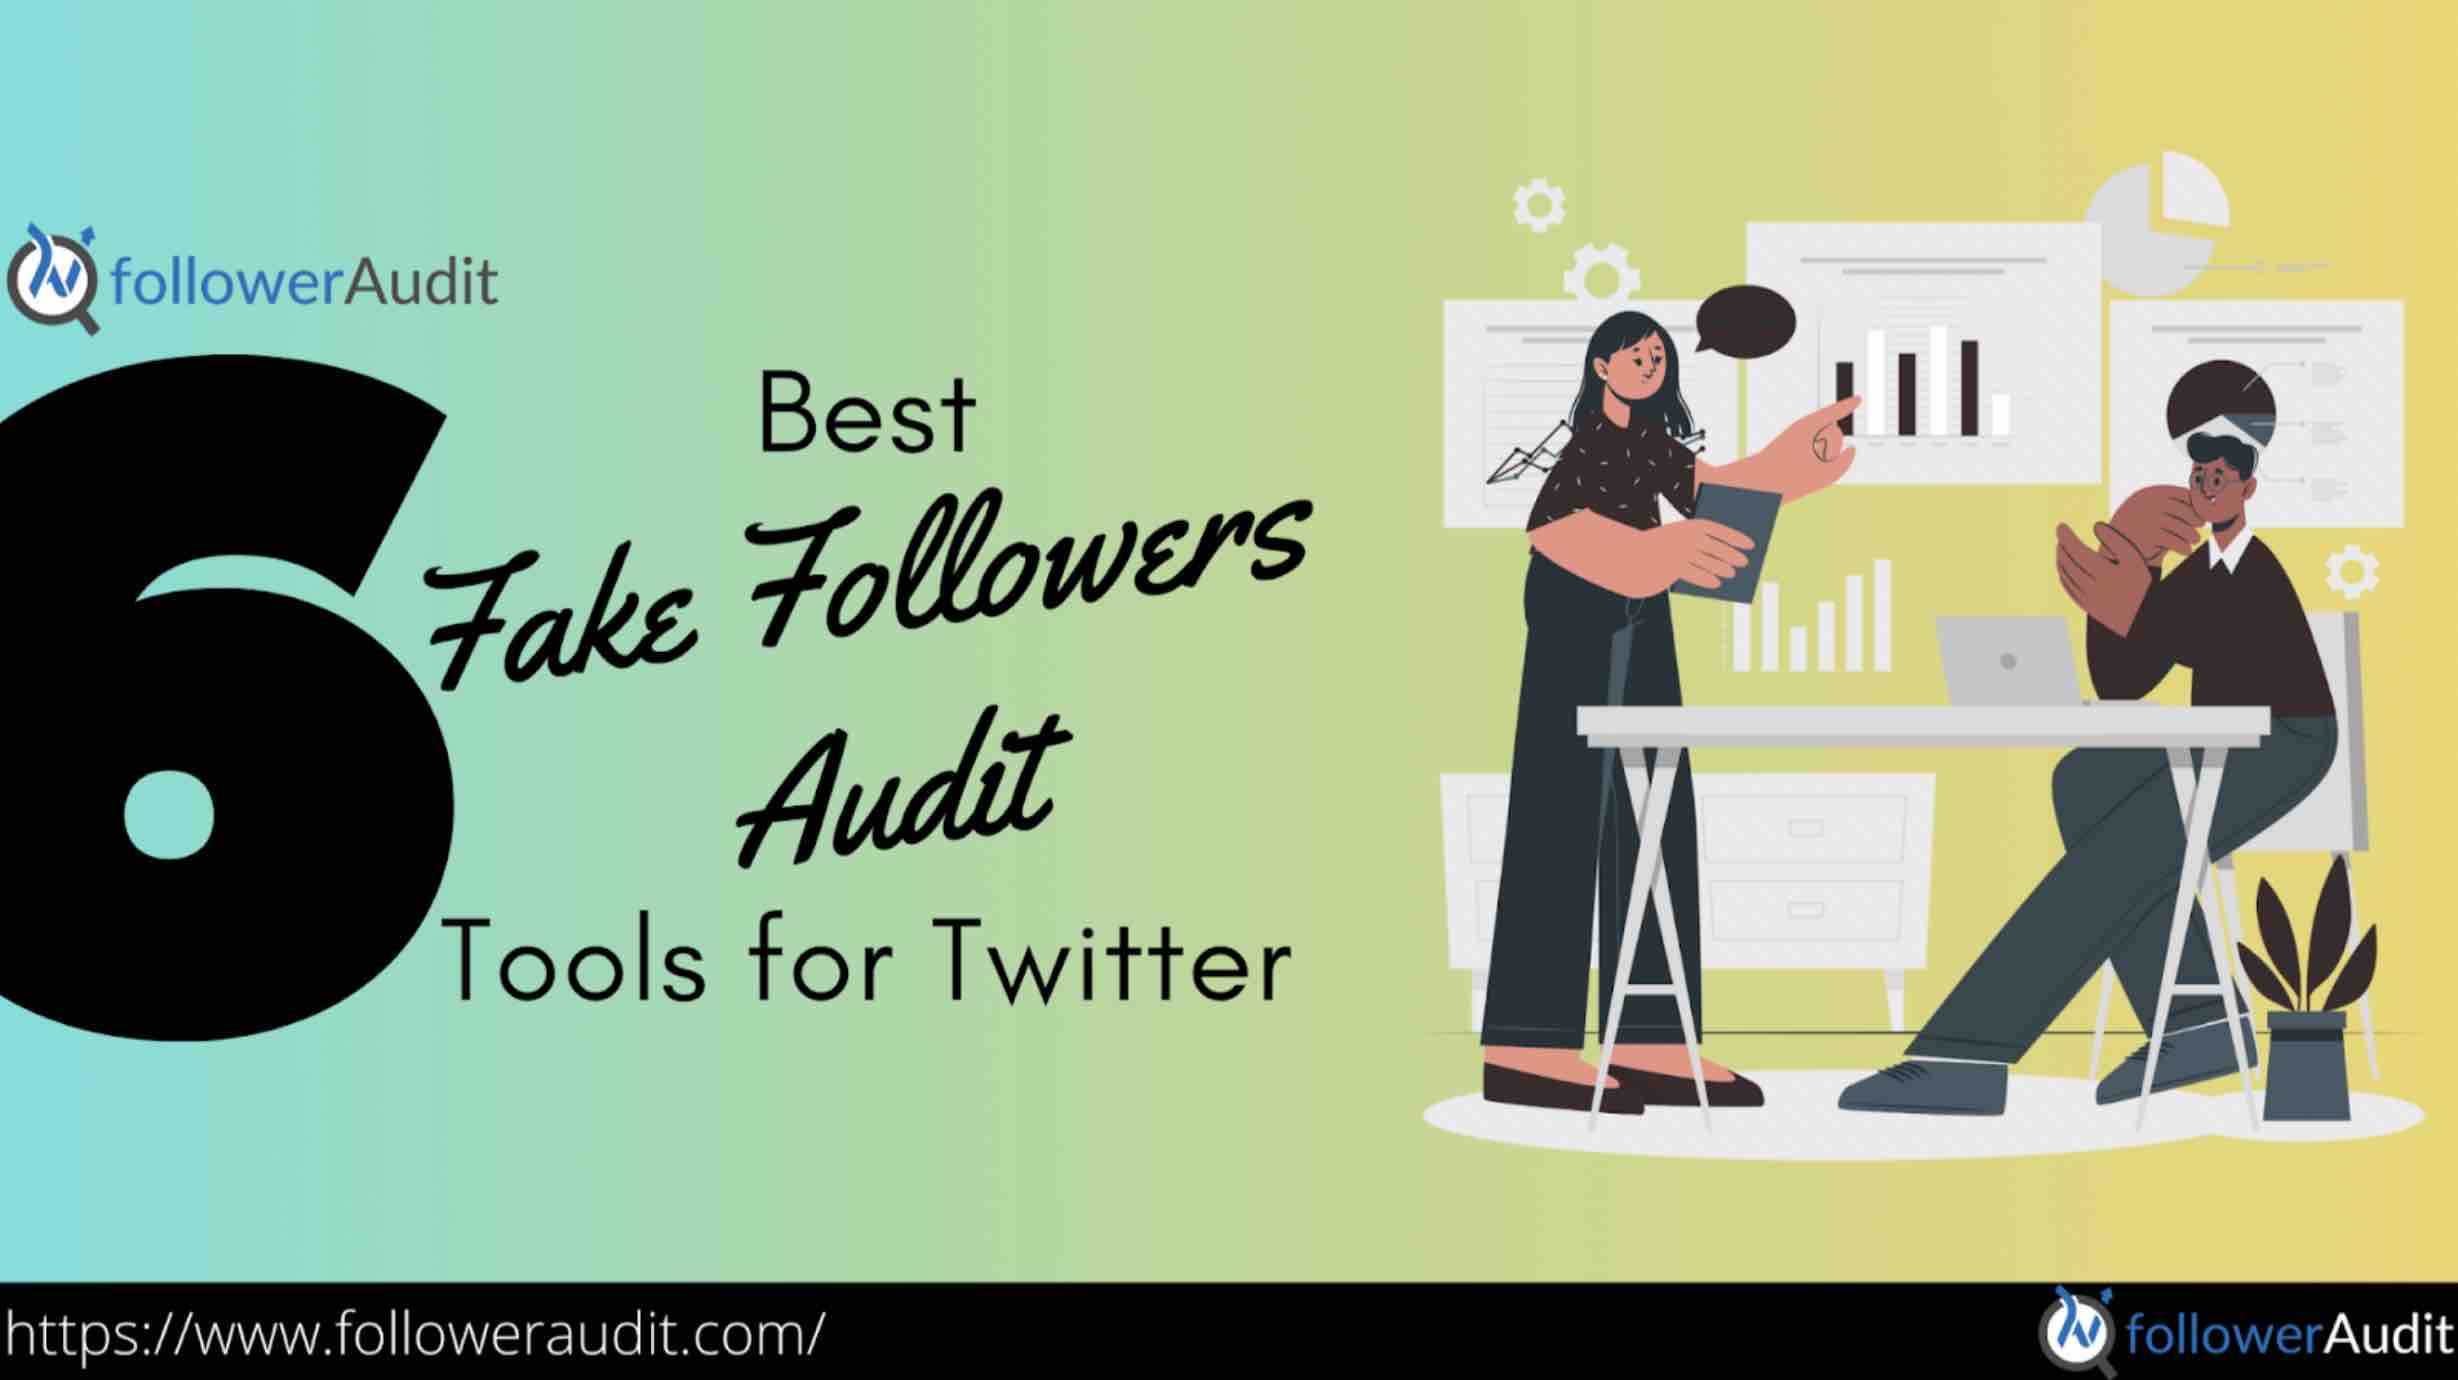 6 Best Fake Followers Audit Tools for Twitter